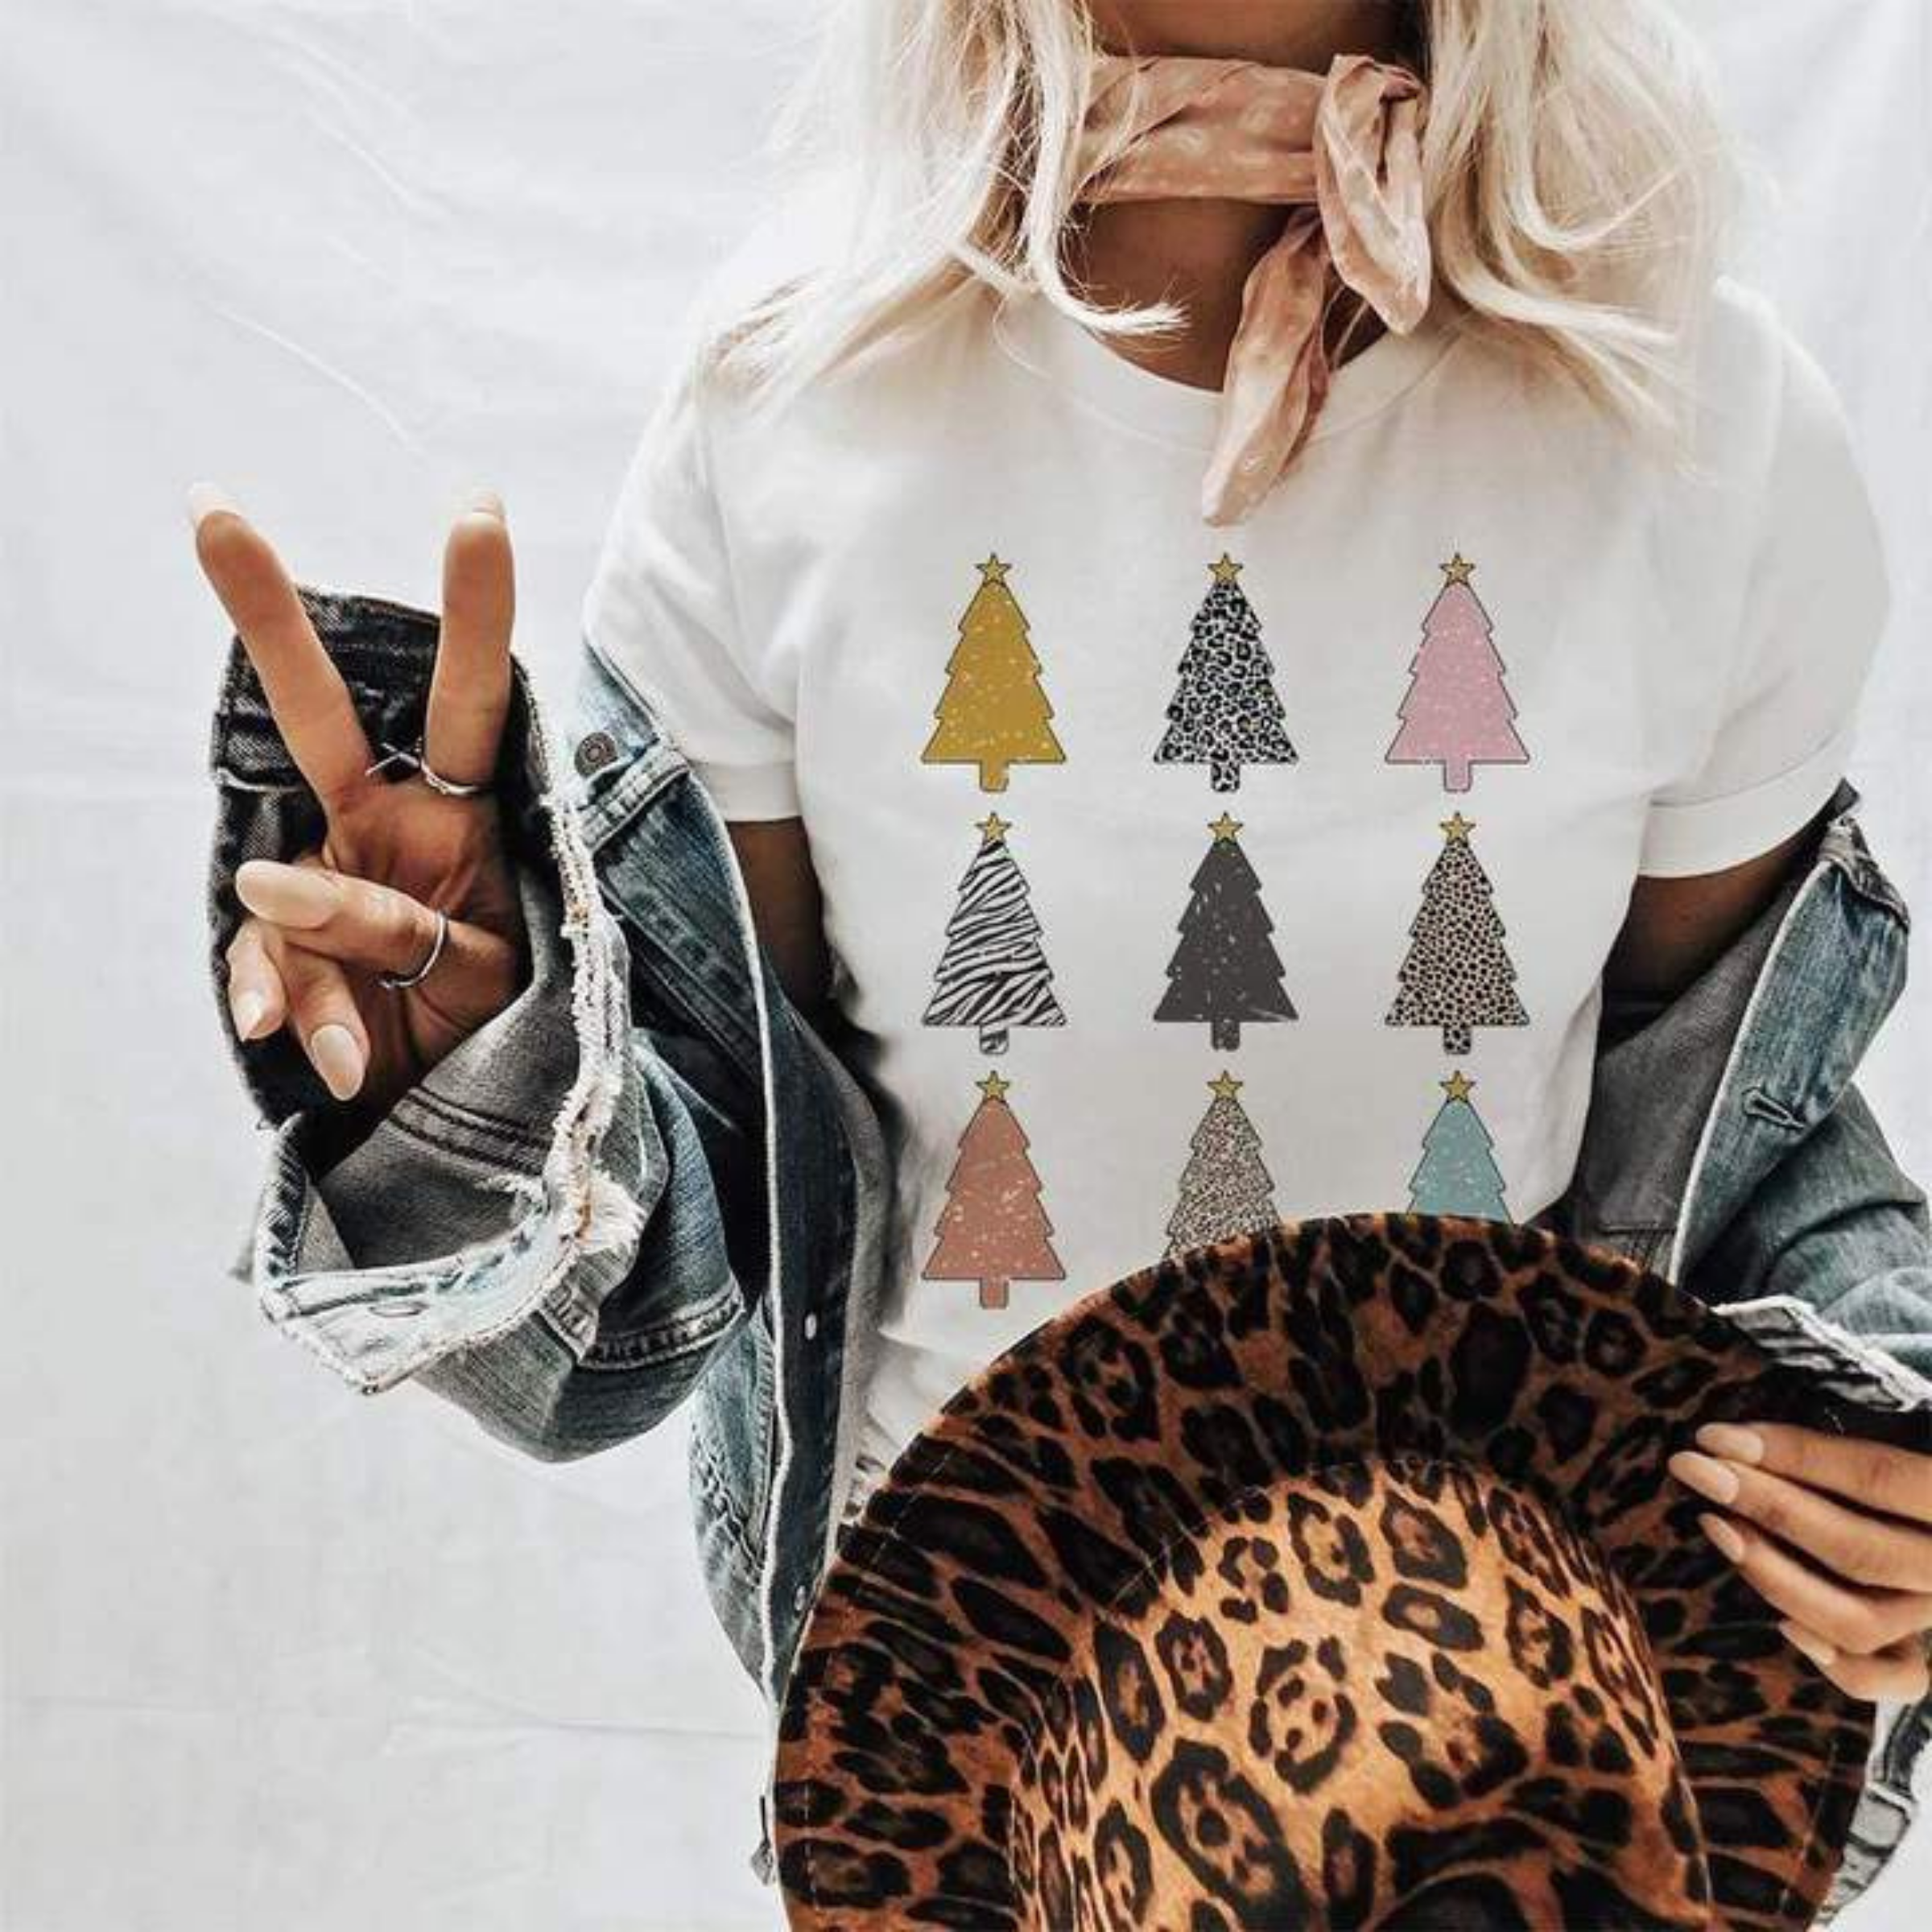 Model is wearing a white short sleeve tee with 3 rows of 3 different print Christmas trees. Model has it paired with a denim jacket, leopard hat, and wild rag tied around the neck.